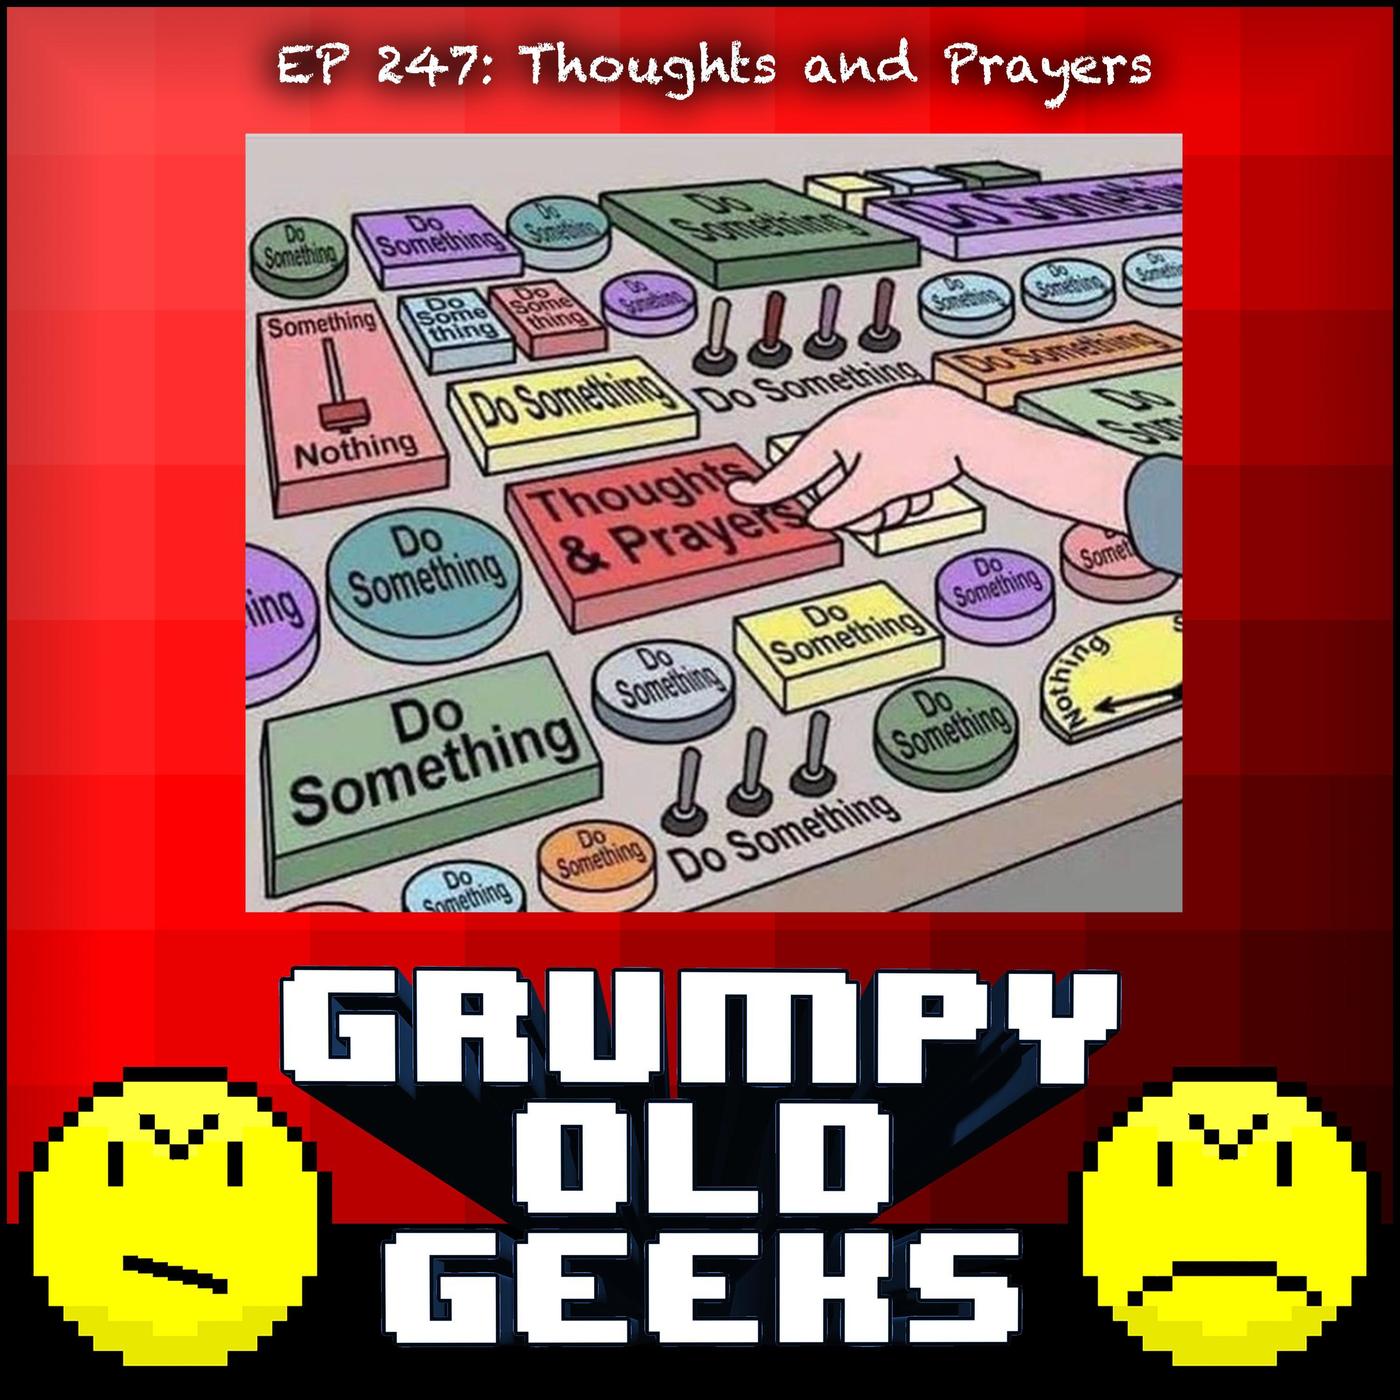 247: Thoughts and Prayers